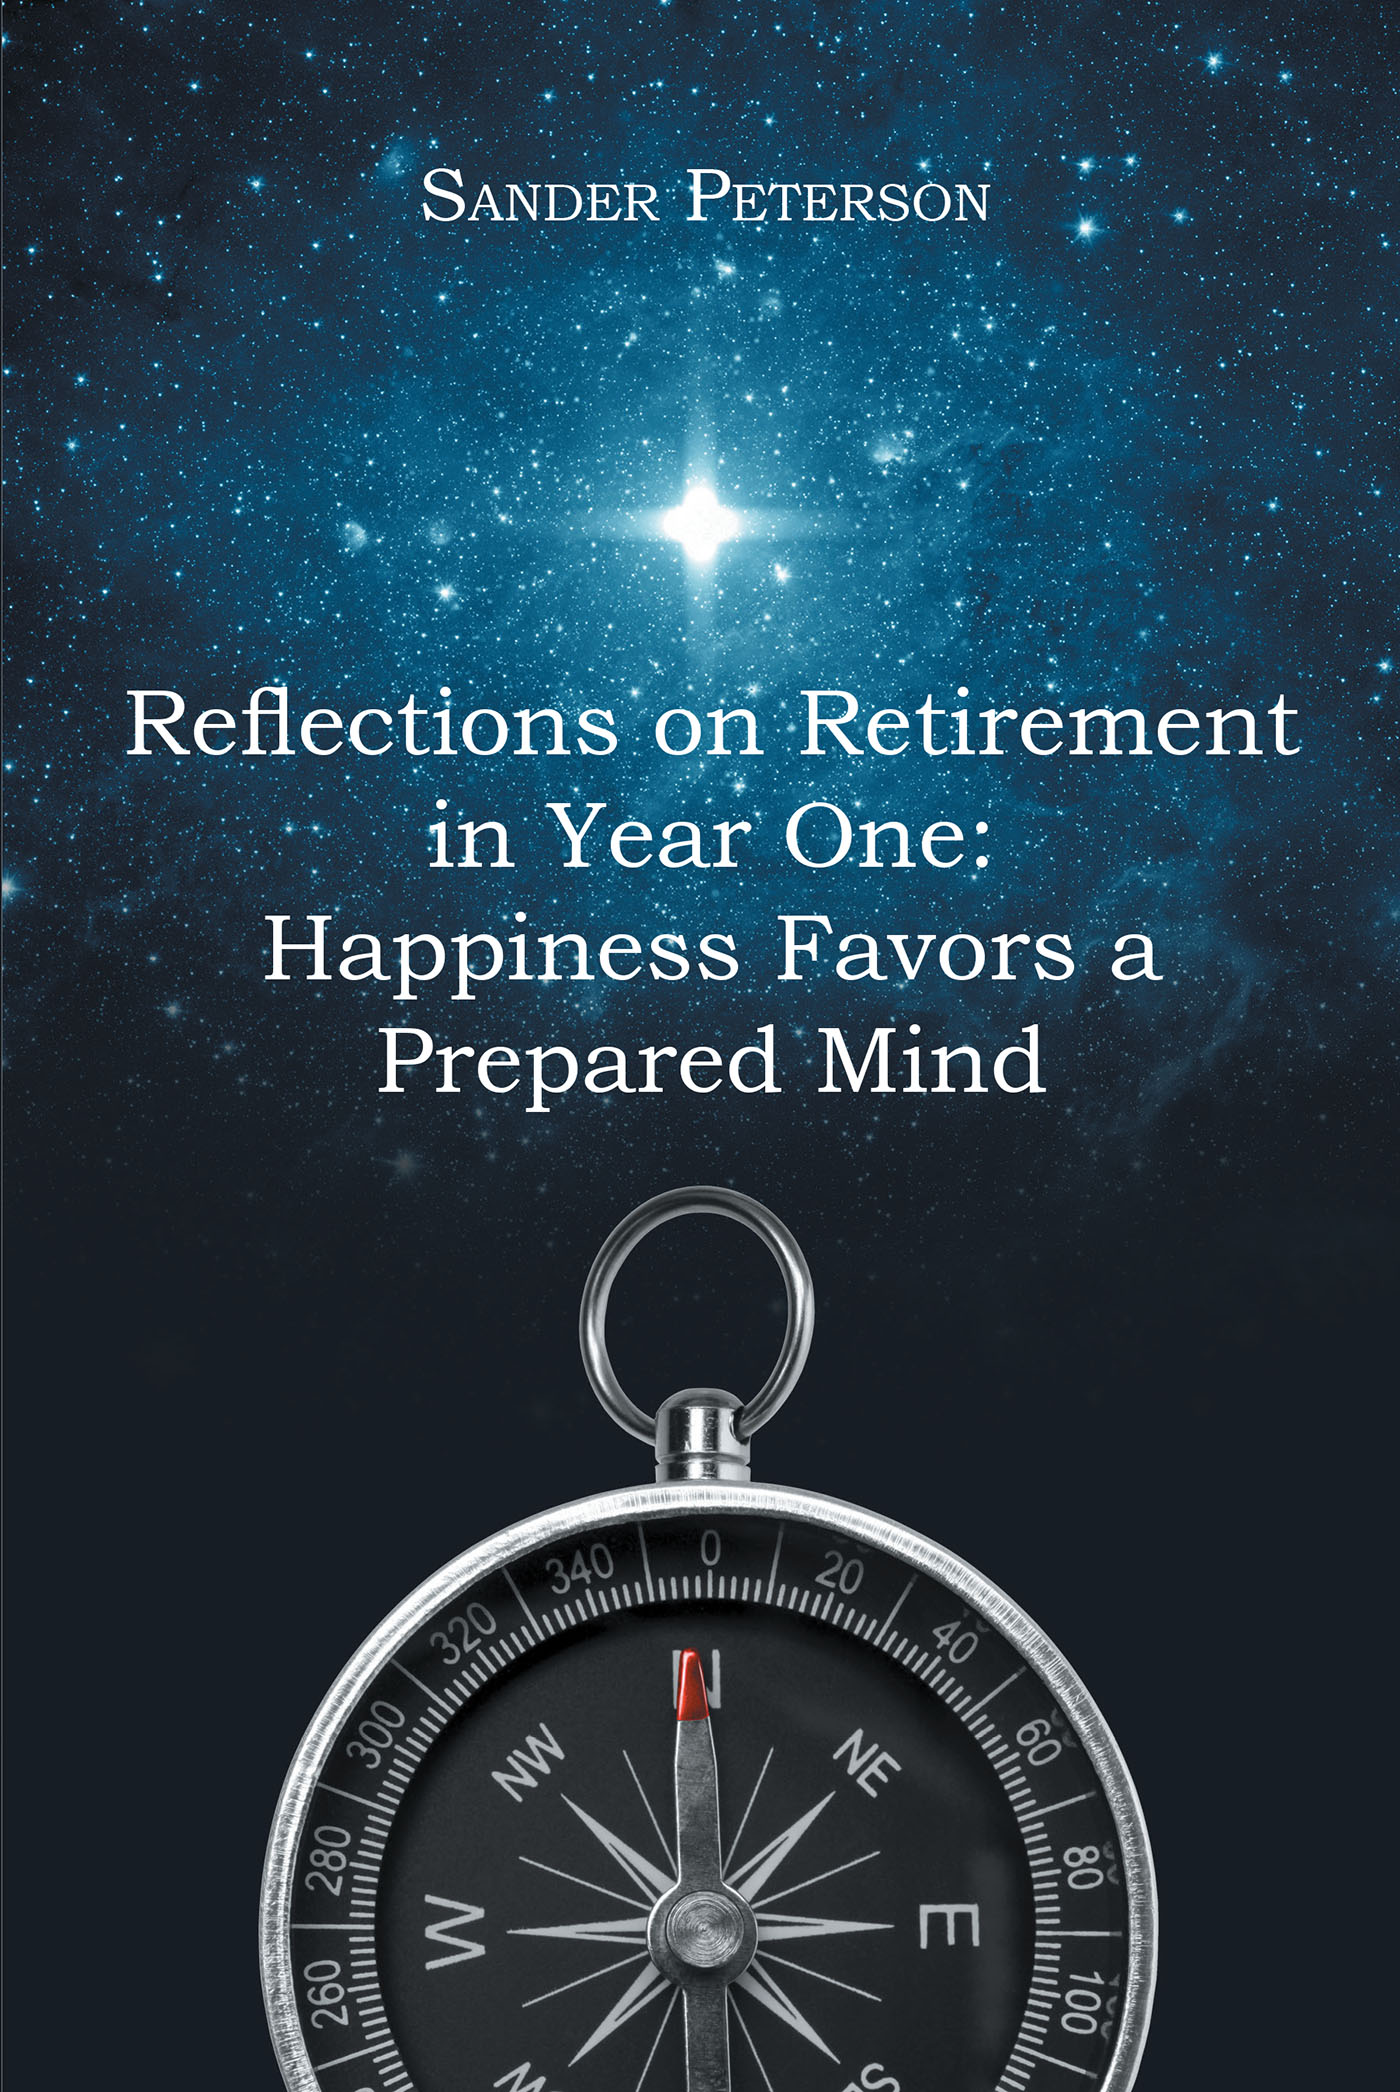 Author Sander Peterson’s New Book, "Reflections on Retirement in Year One," is a Book to Help Prepare Those Ready to Transition Into Retirement